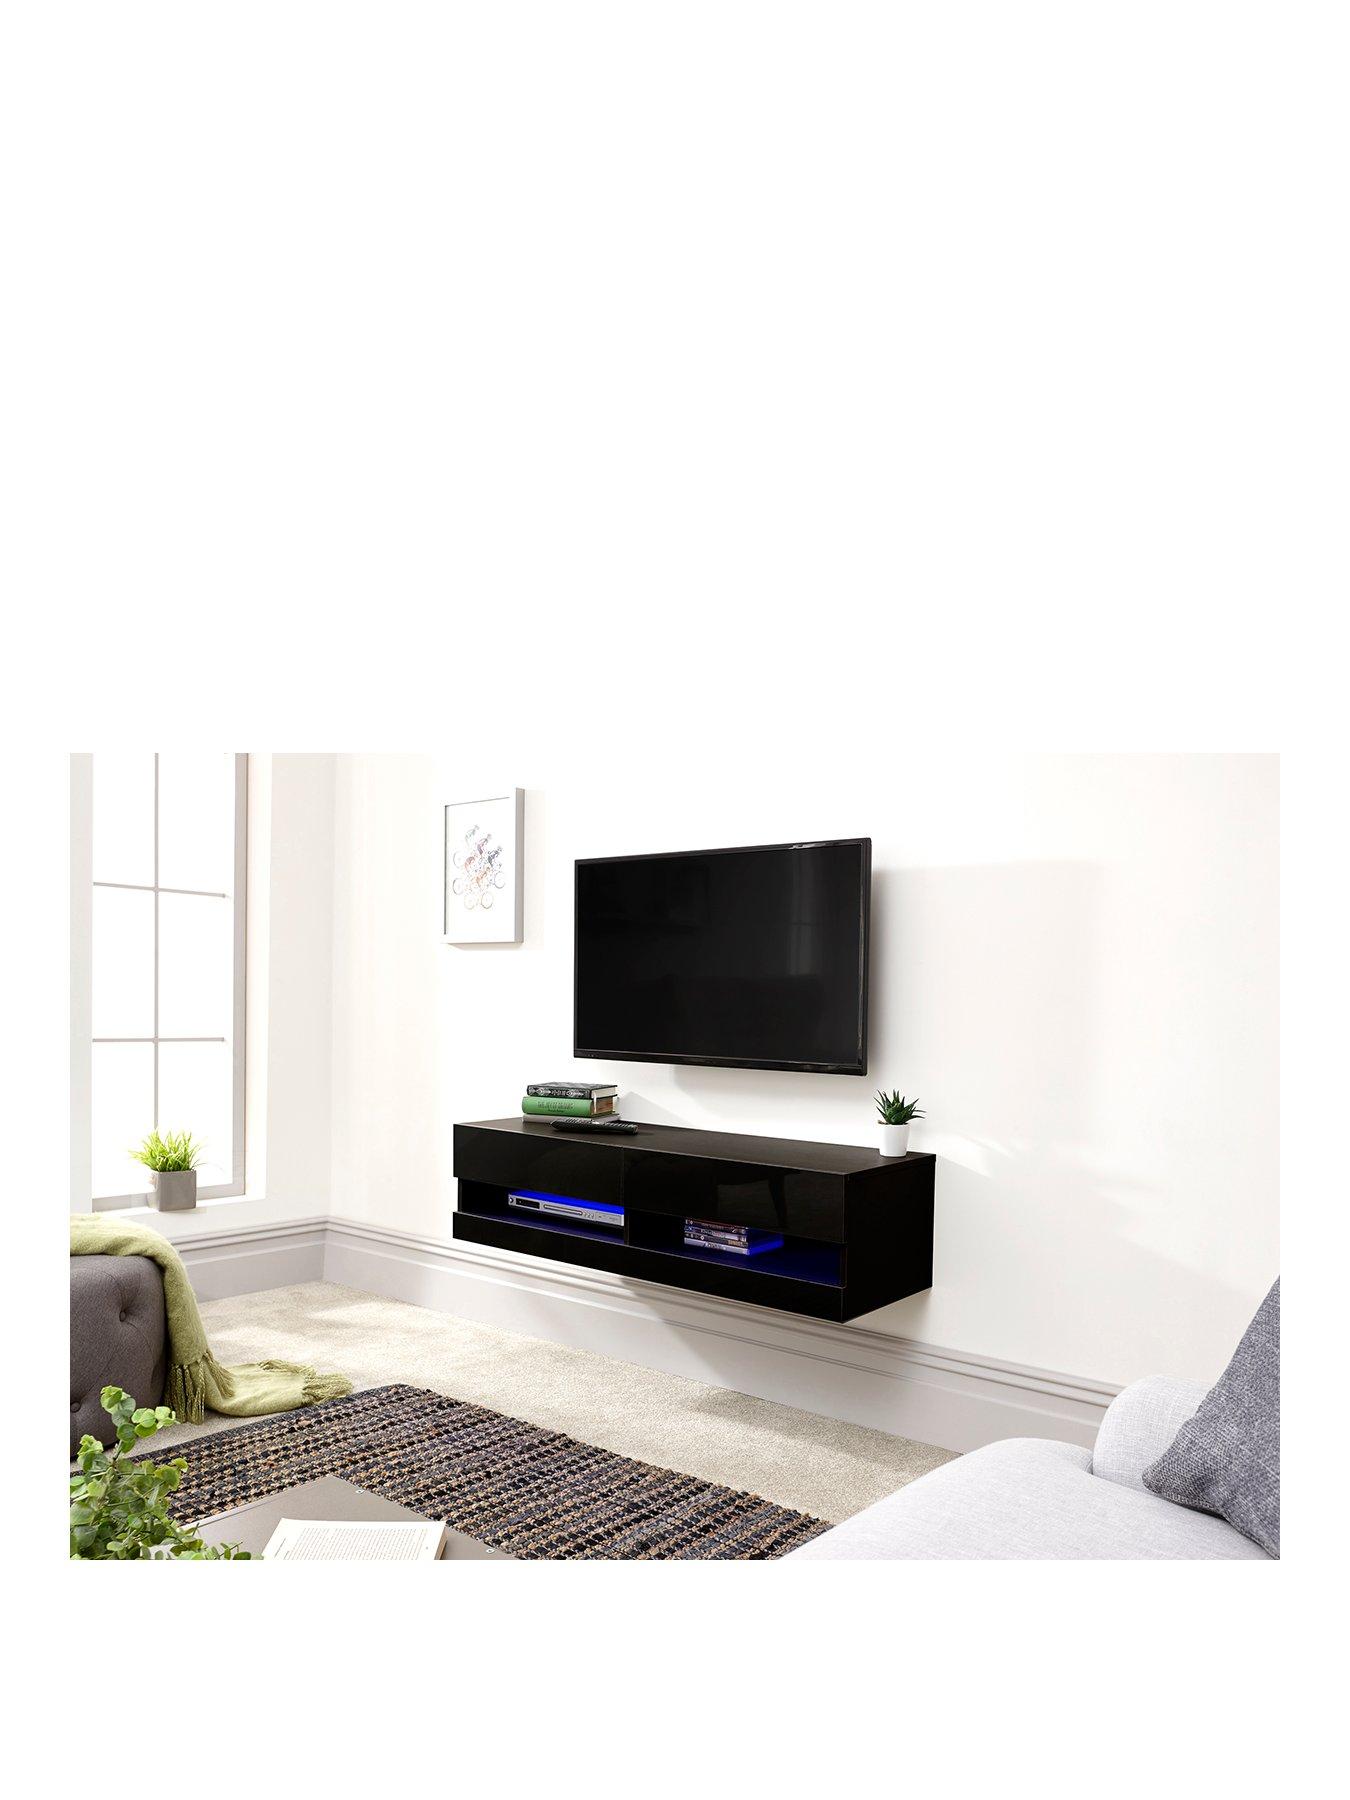 Clear Glass TV Stand Oak Legs 125cm wide for 32 42 50 55 inch LCD LED smart flat screen TVs universal 